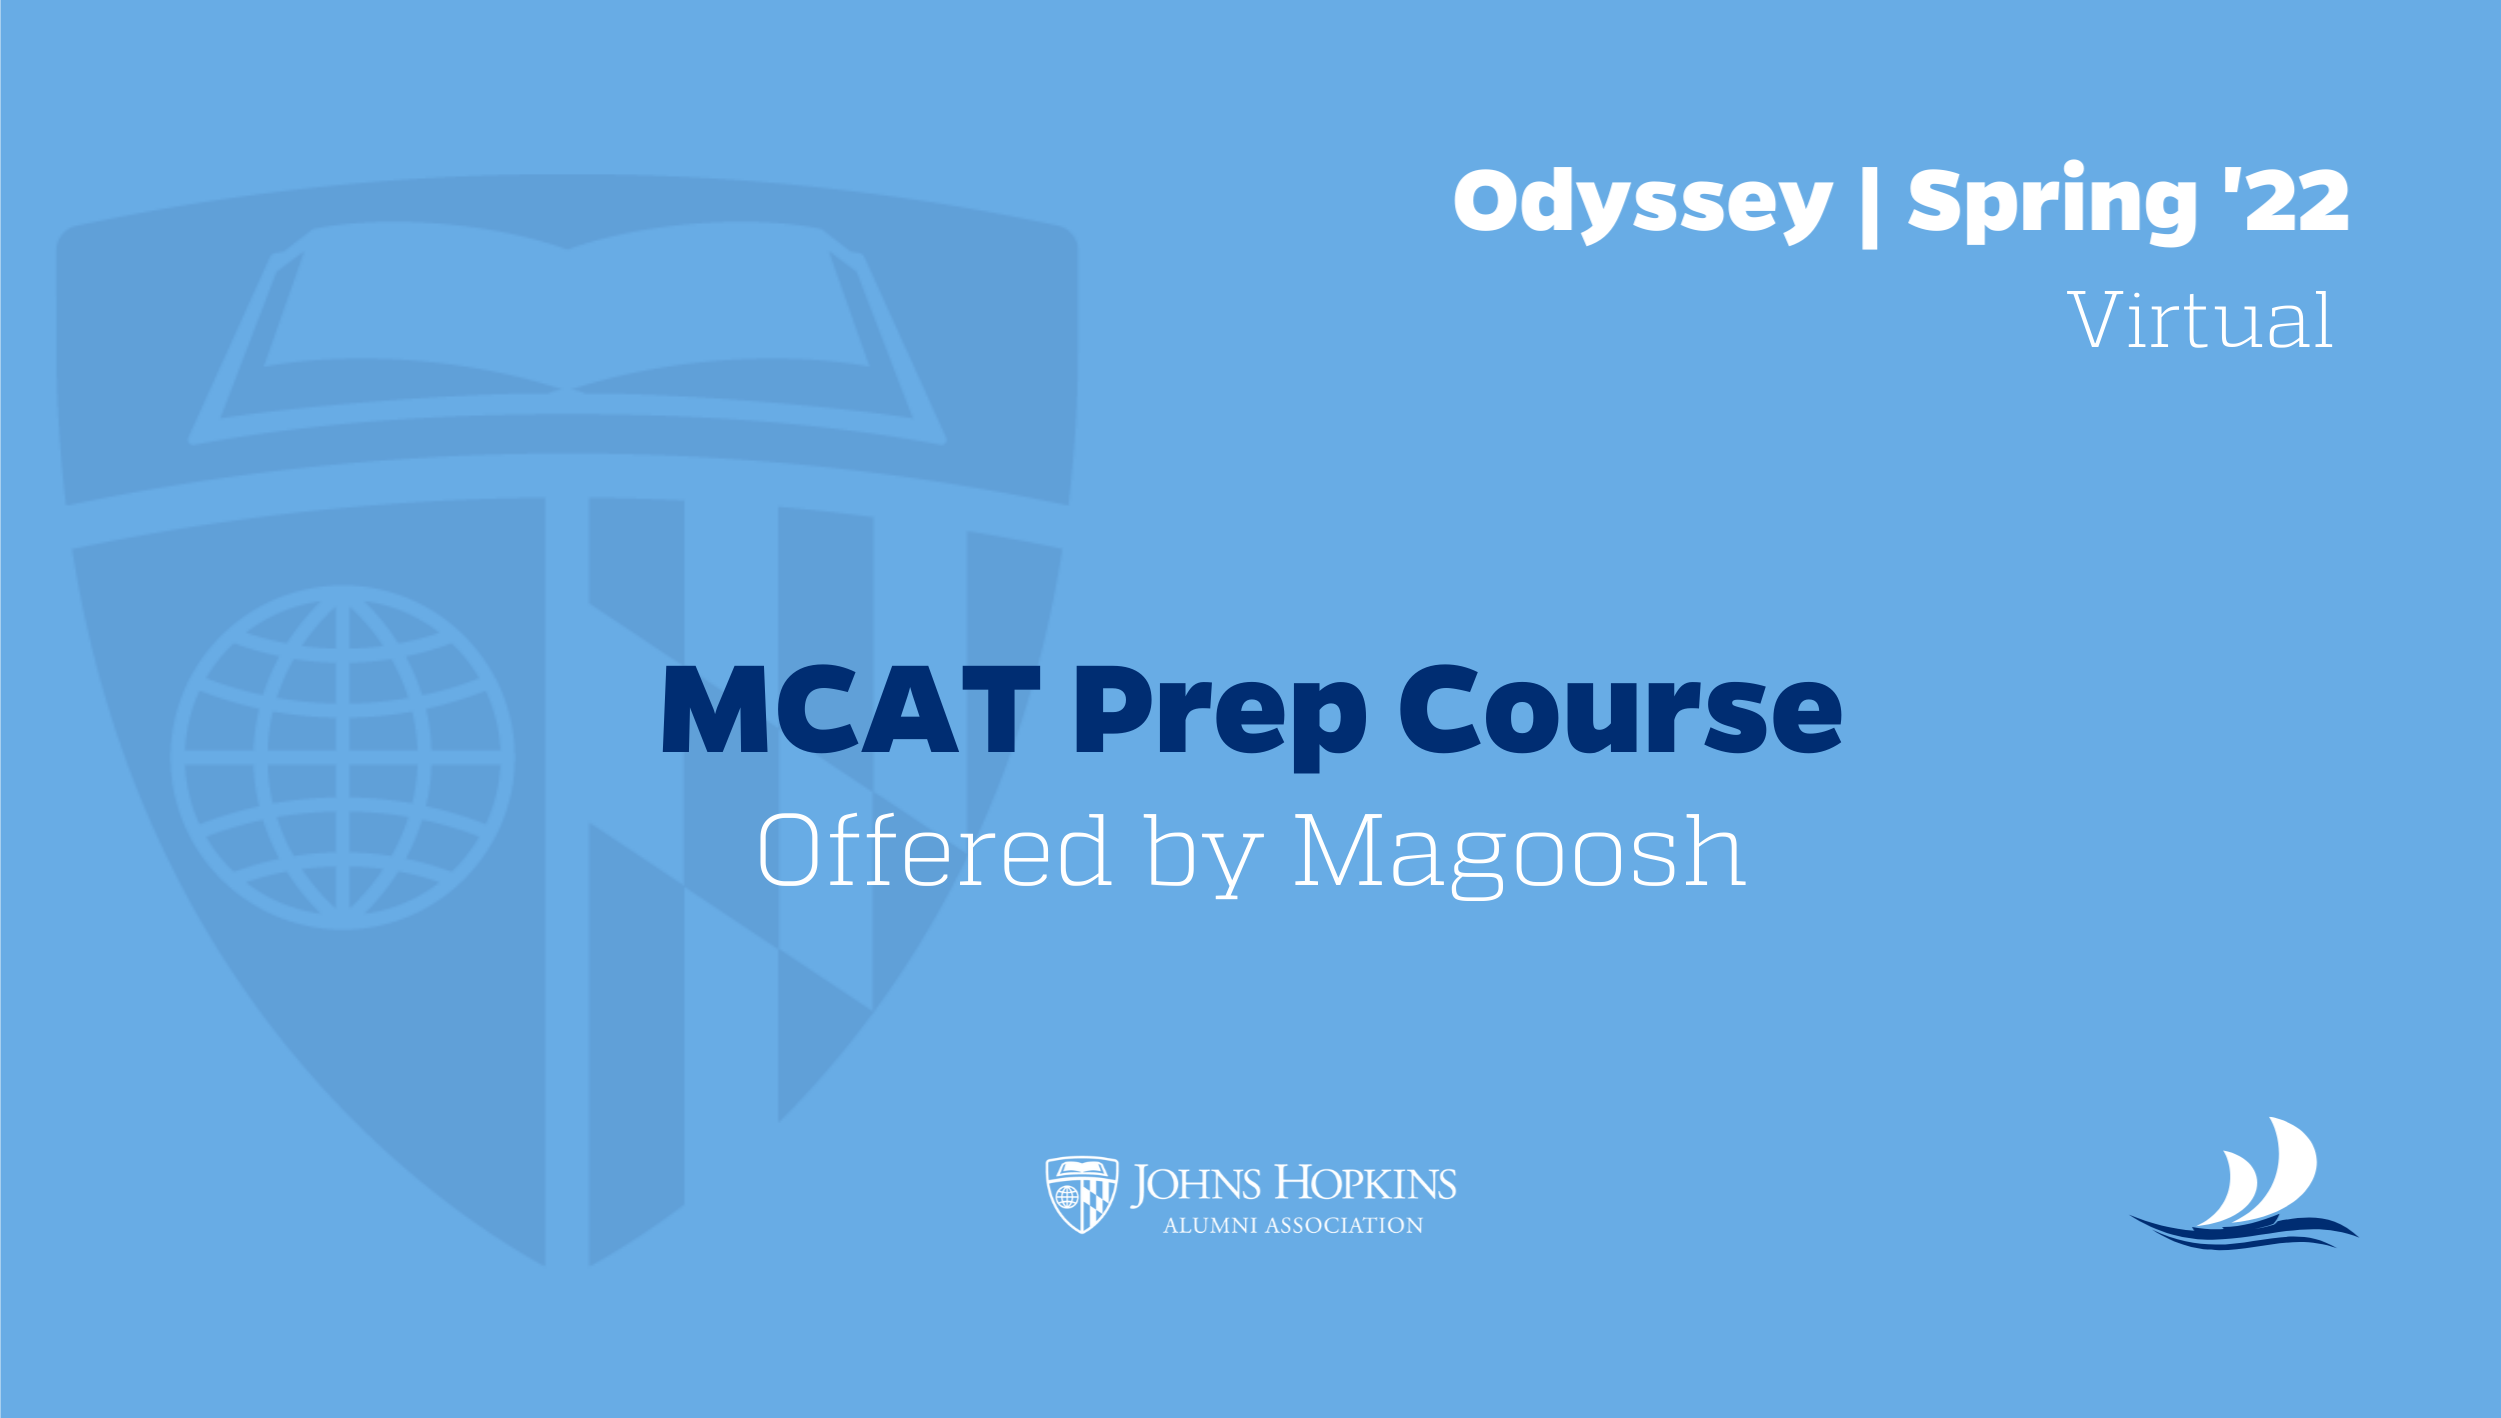 Odyssey title on light blue background featuring the alumni association logo and course title, MCAT Prep Course with Magoosh